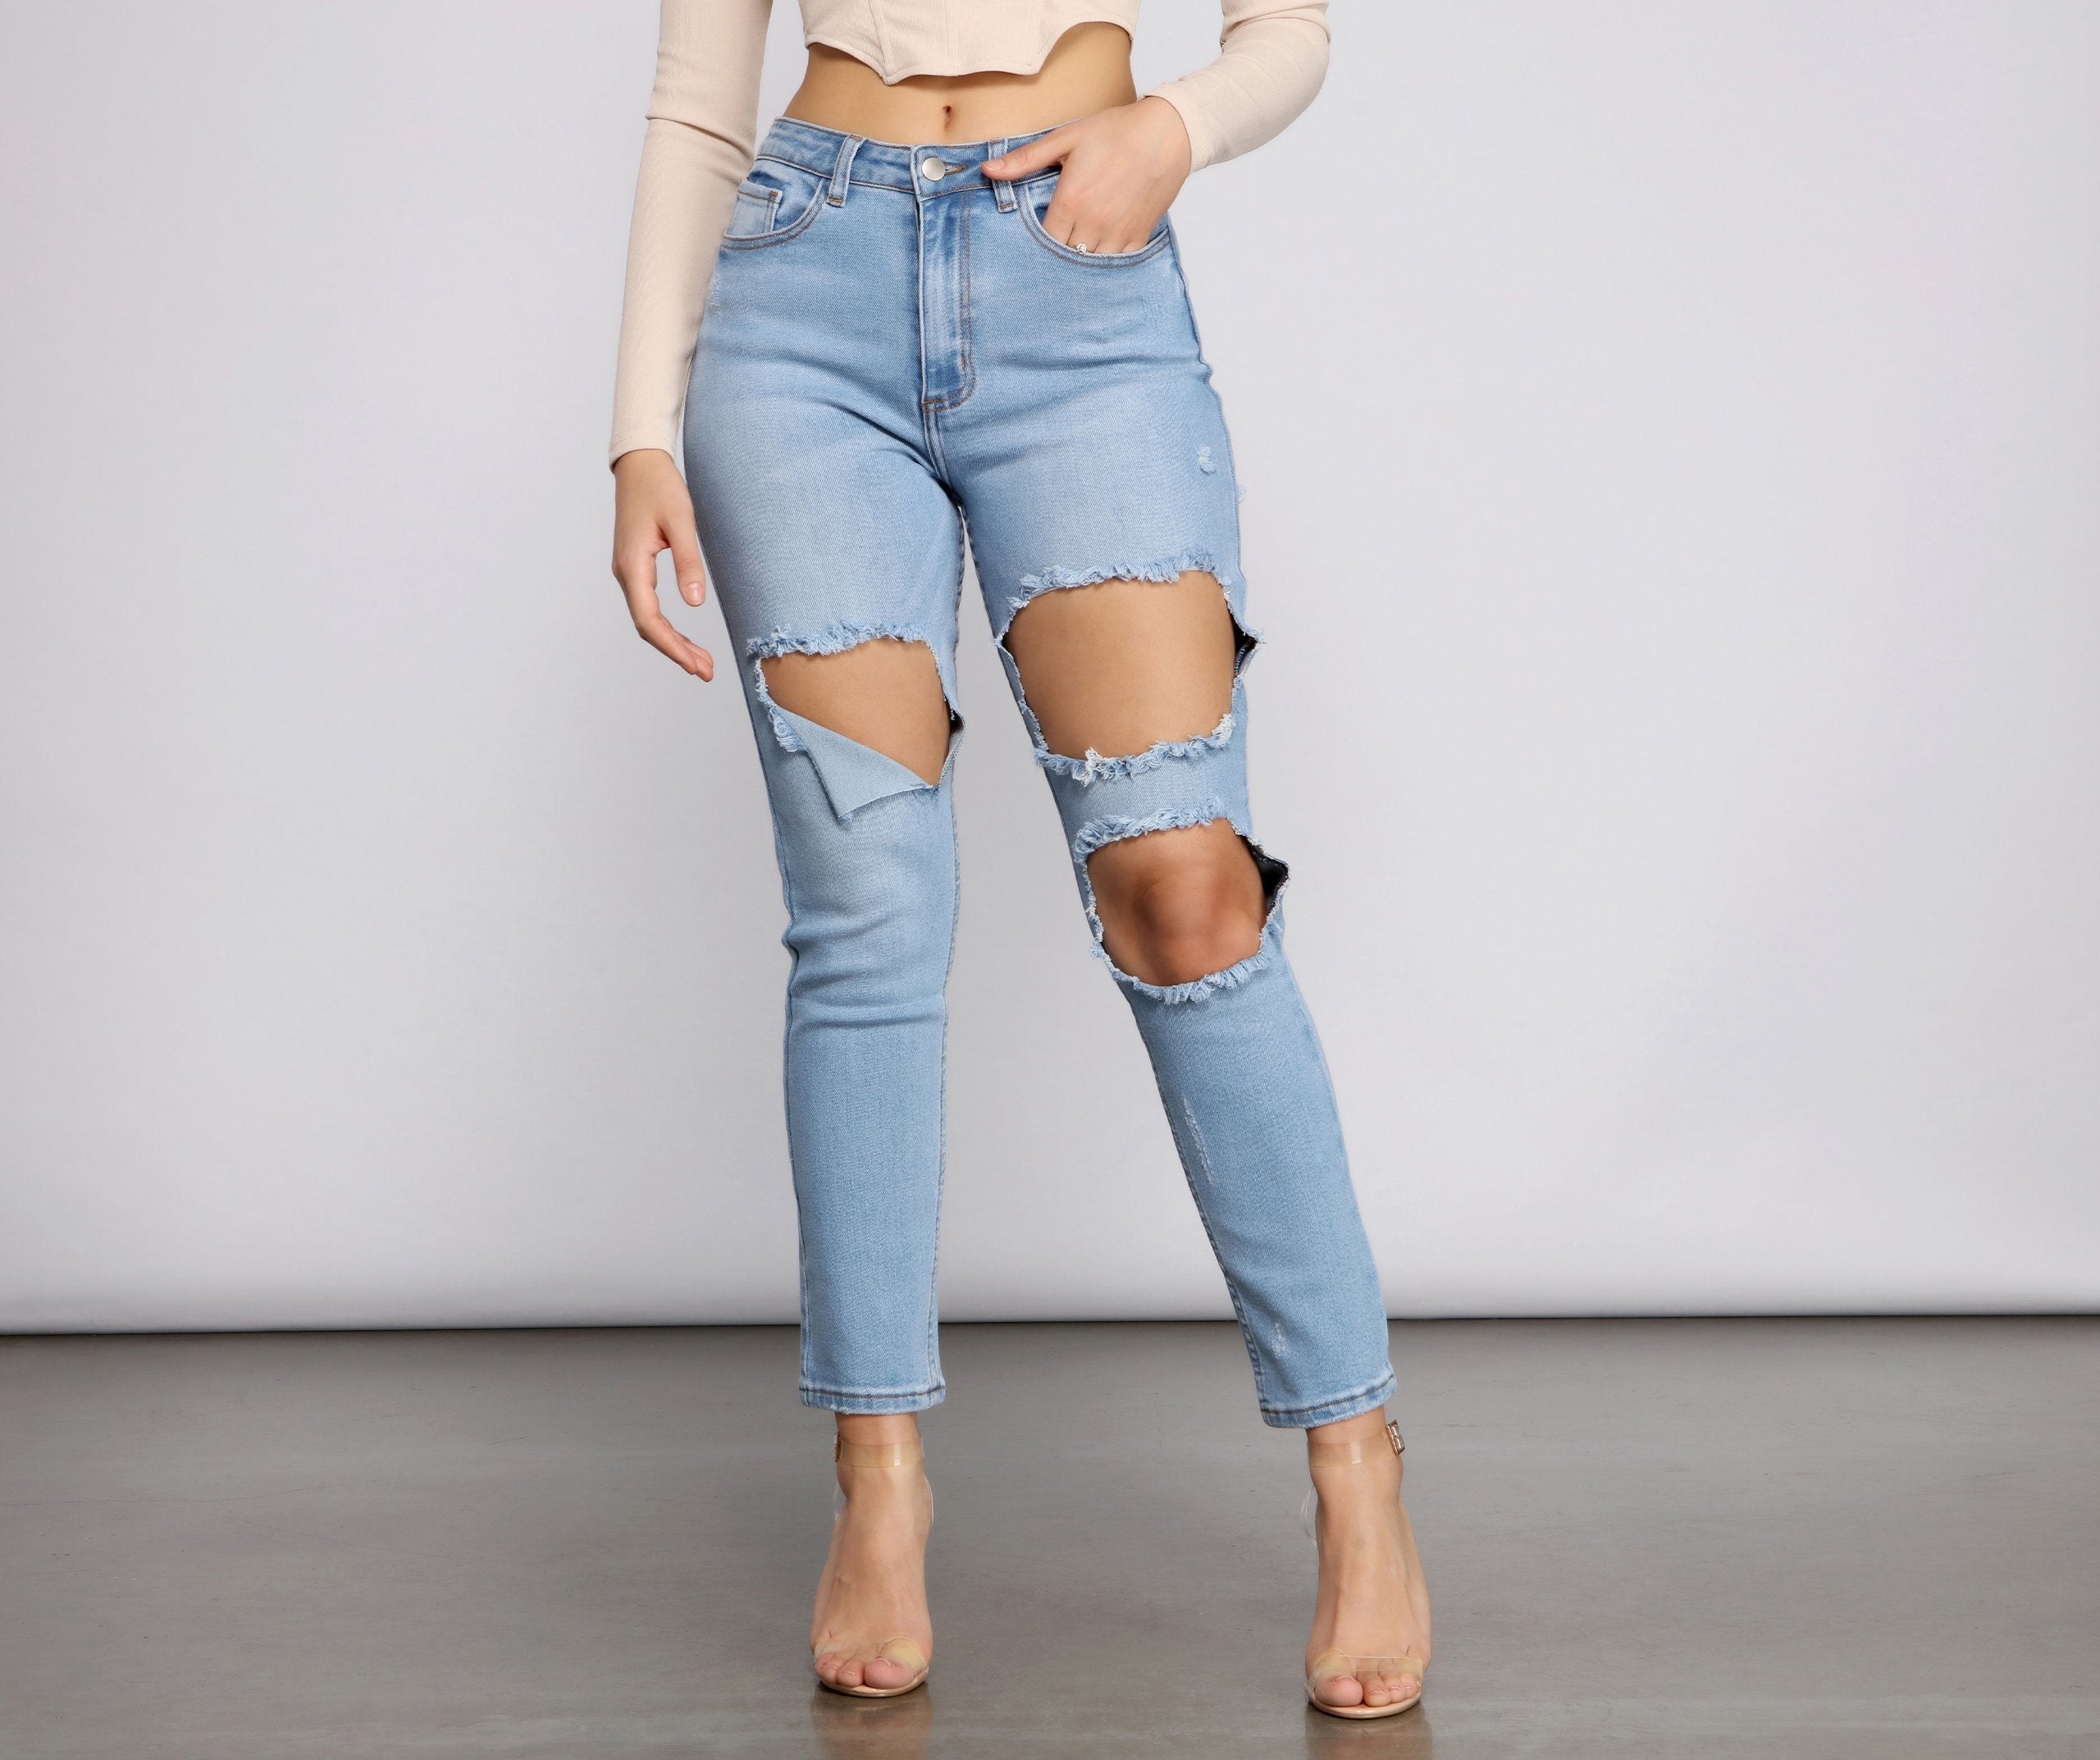 High Waist Trendy Cut Out Skinny Jeans